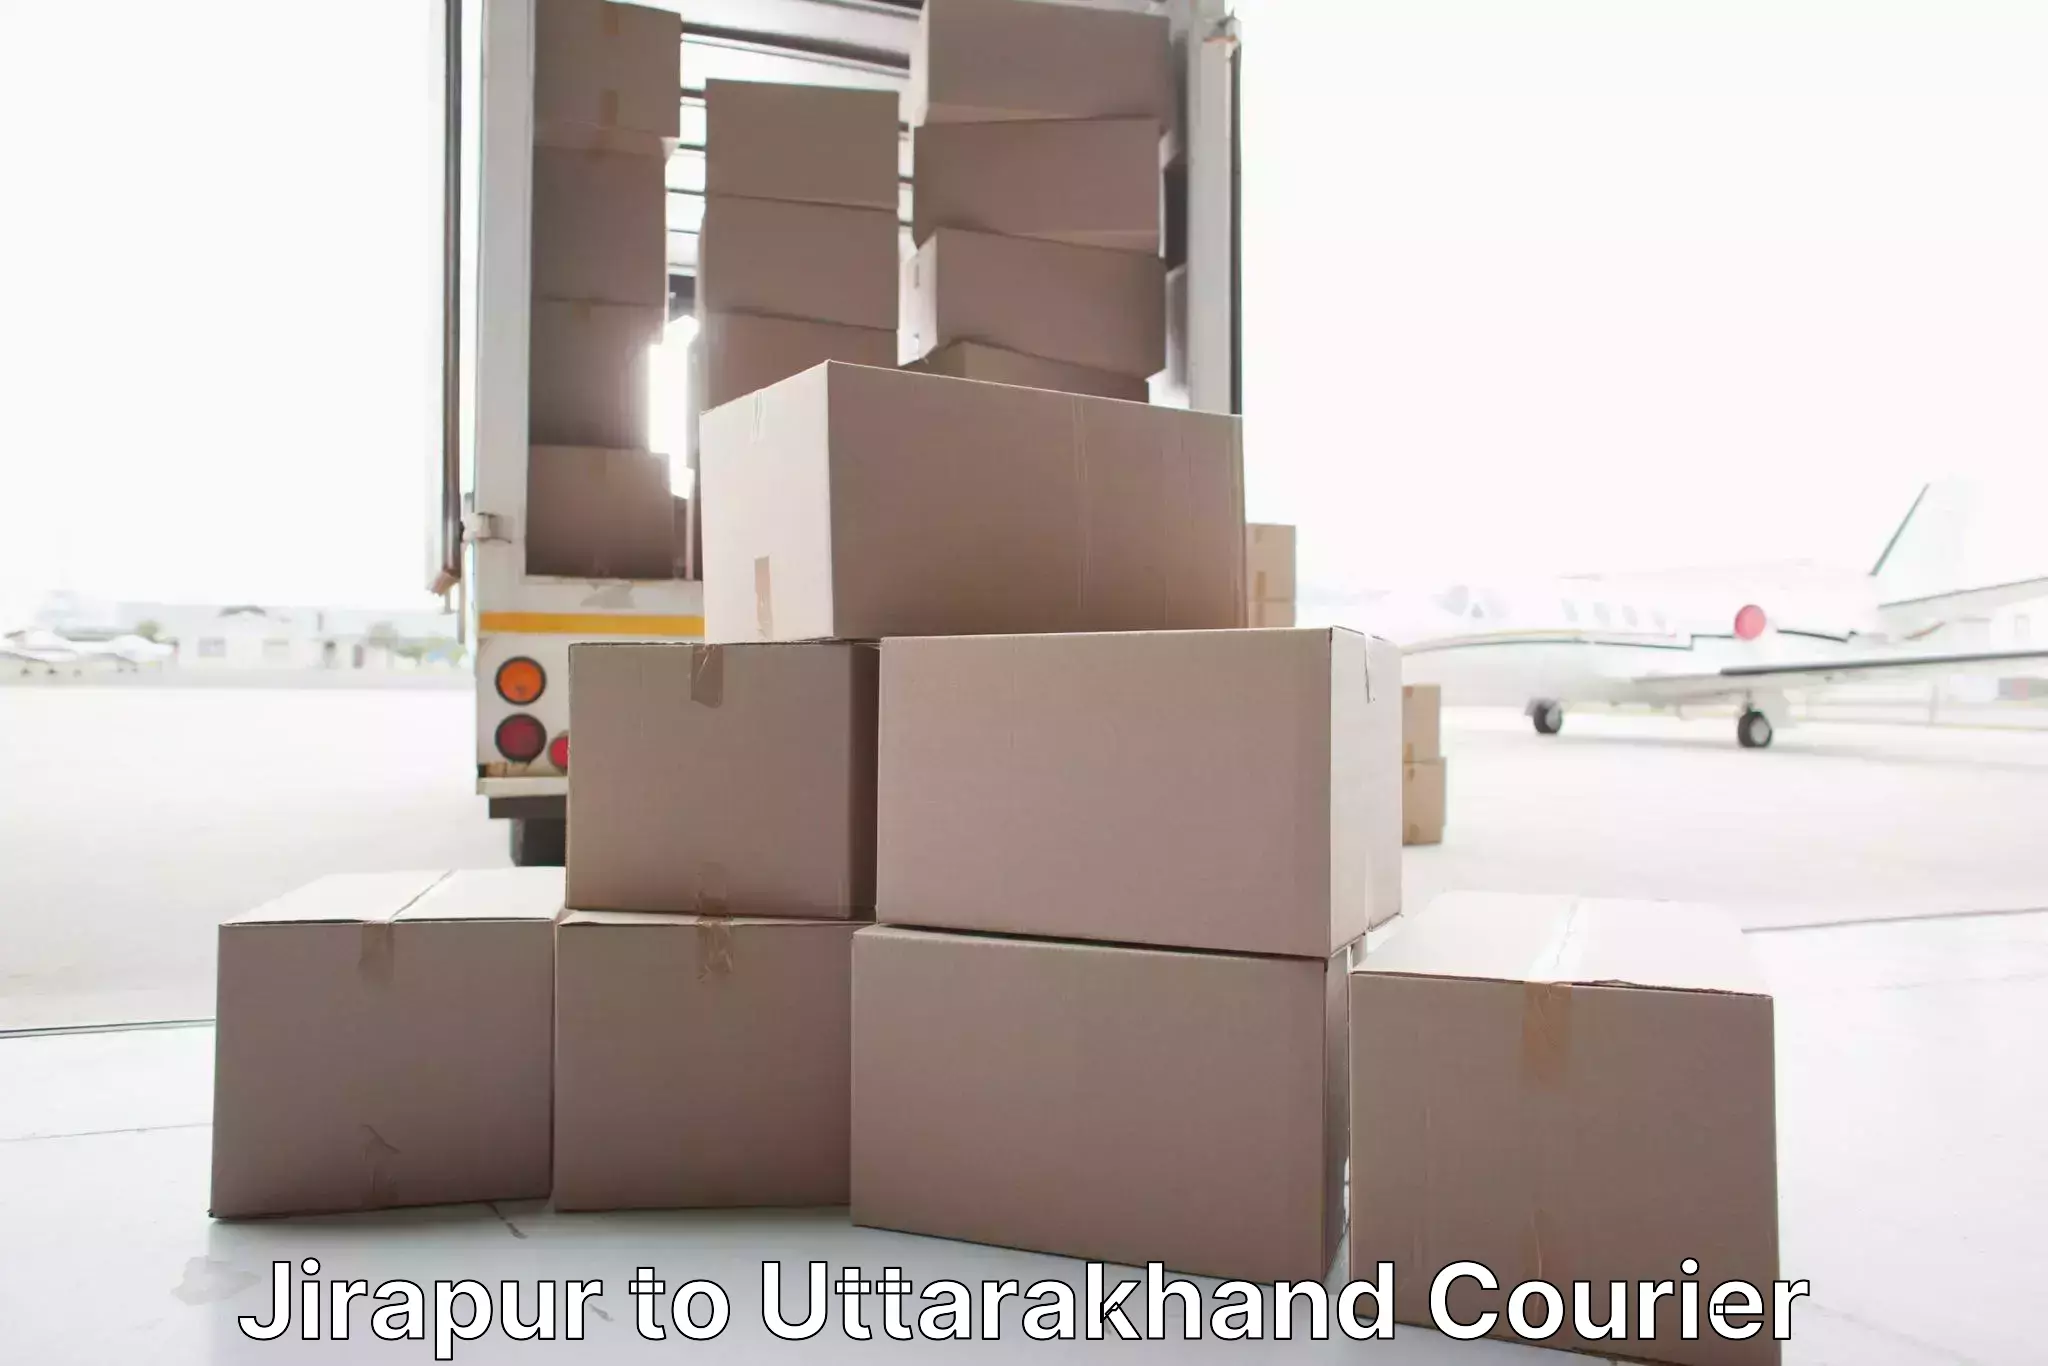 Advanced household moving services Jirapur to Bageshwar